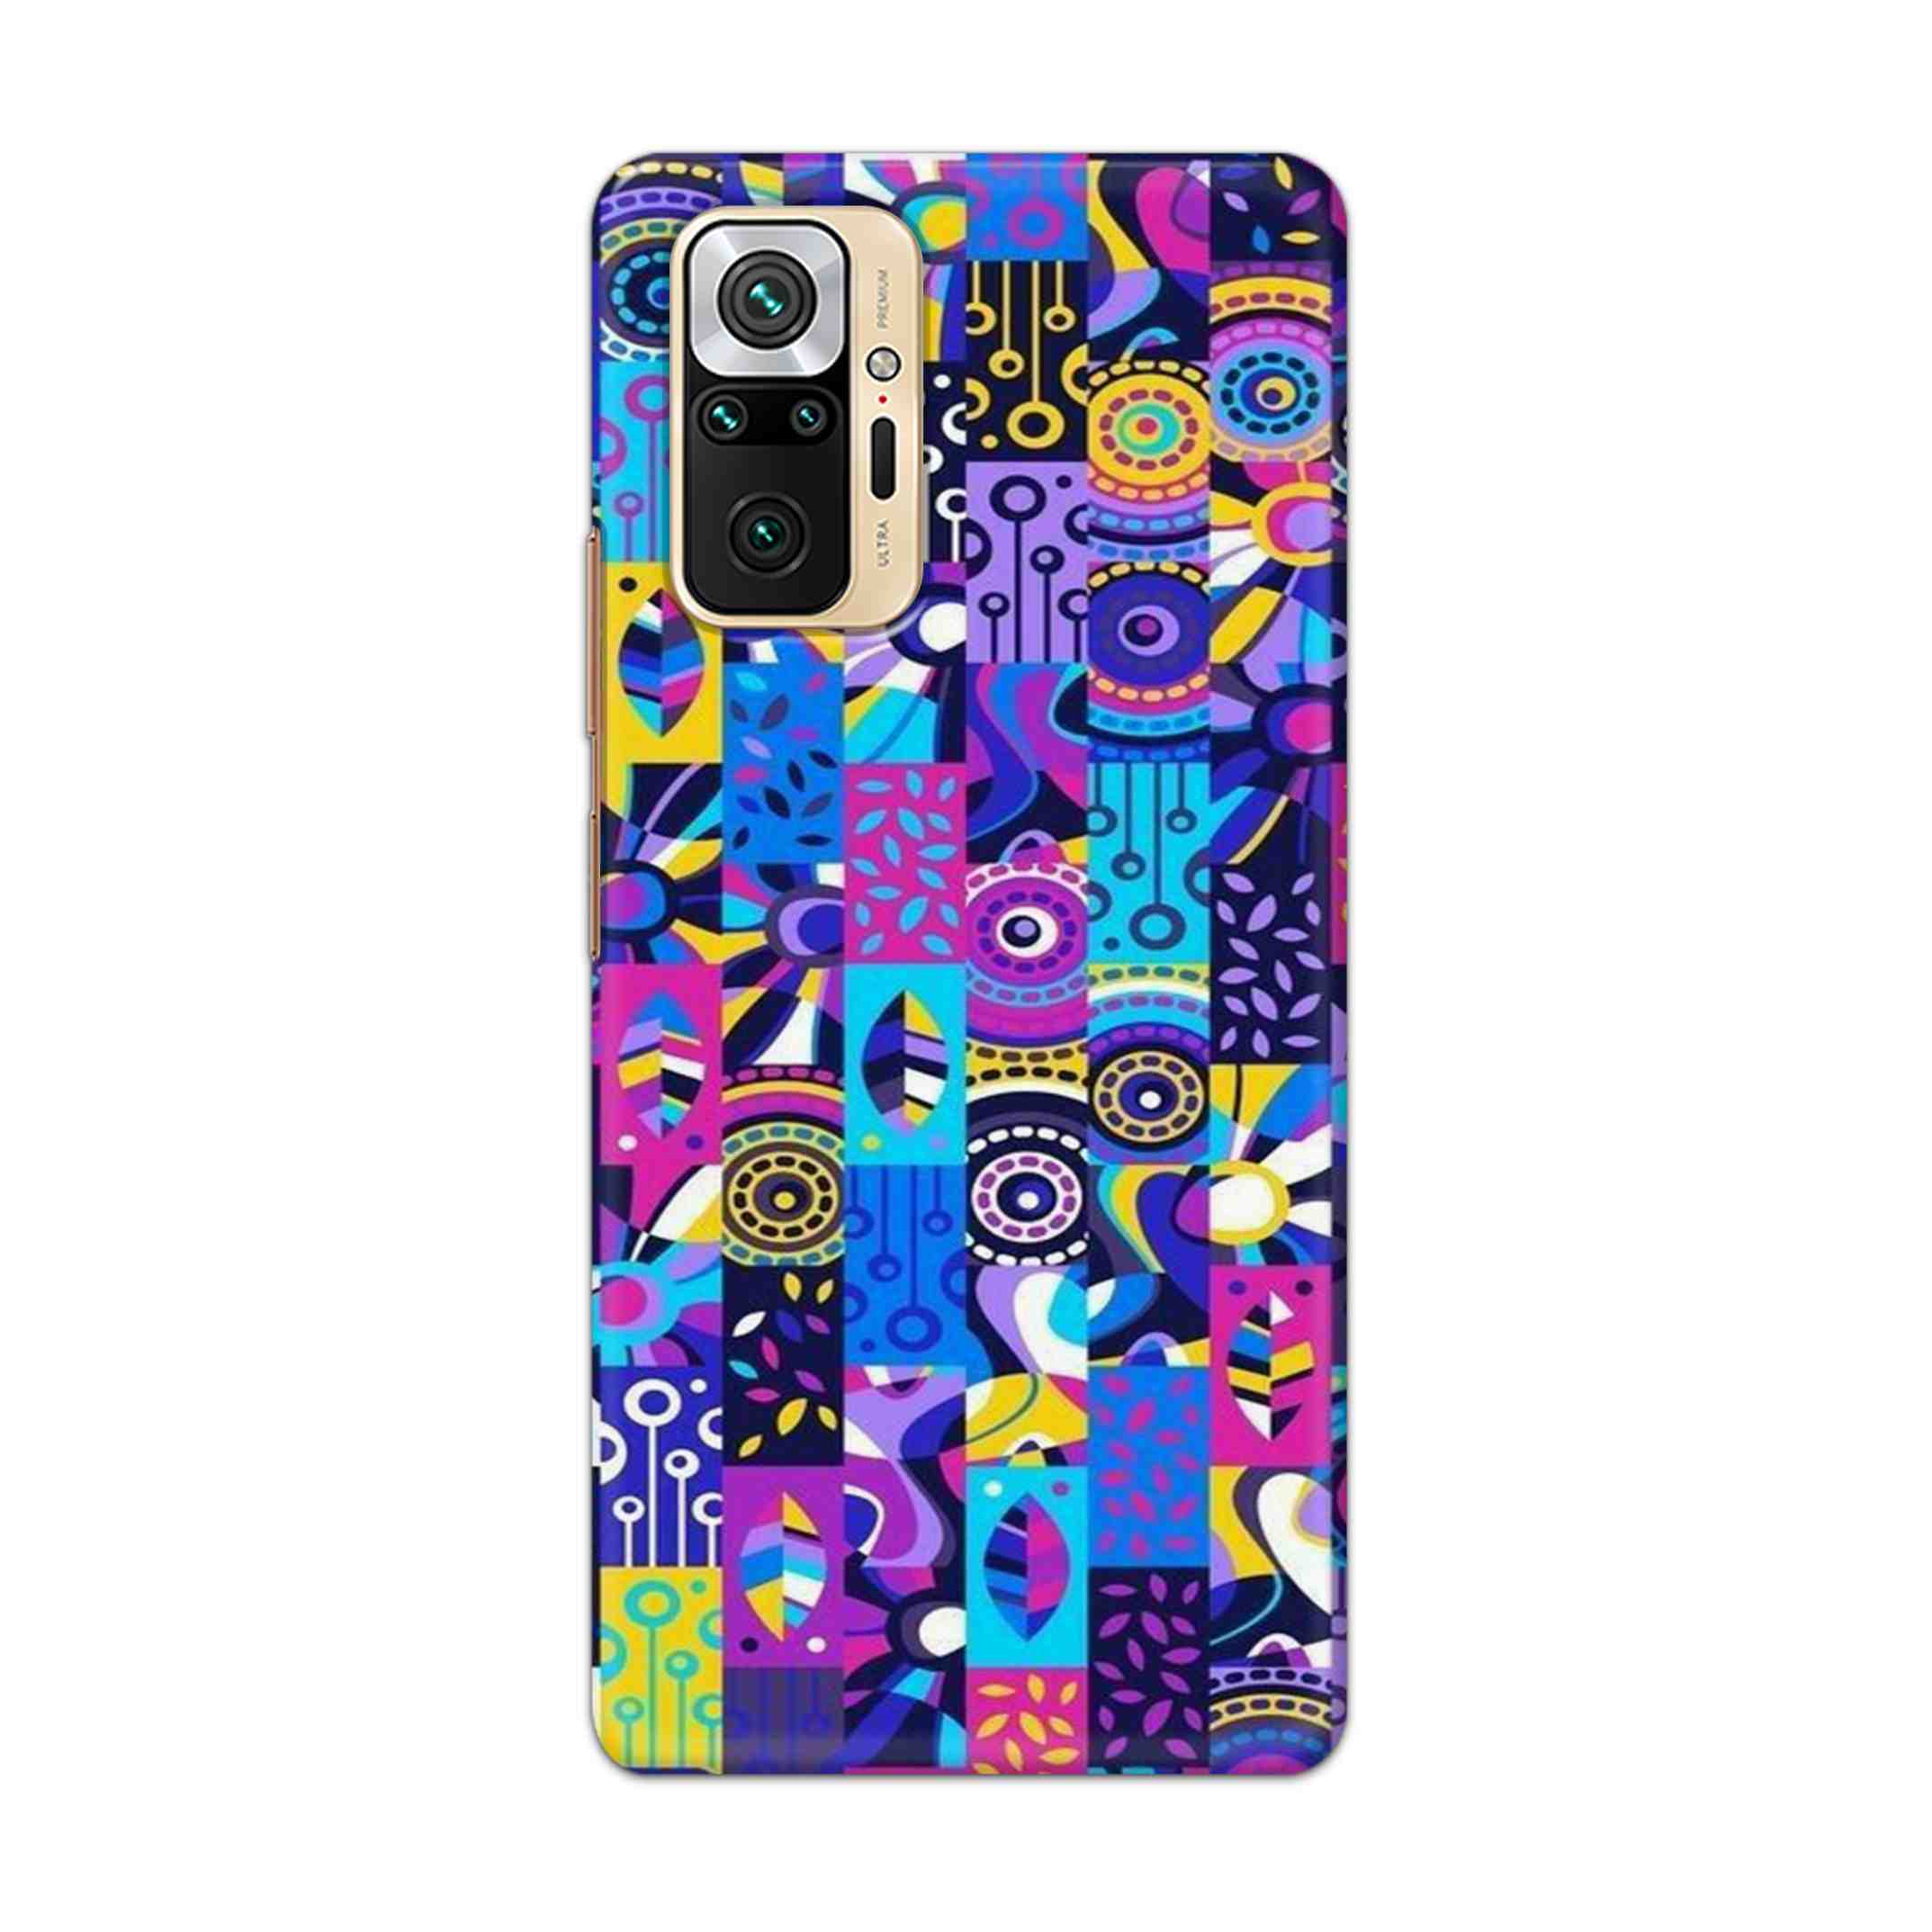 Buy Rainbow Art Hard Back Mobile Phone Case Cover For Redmi Note 10 Pro Online